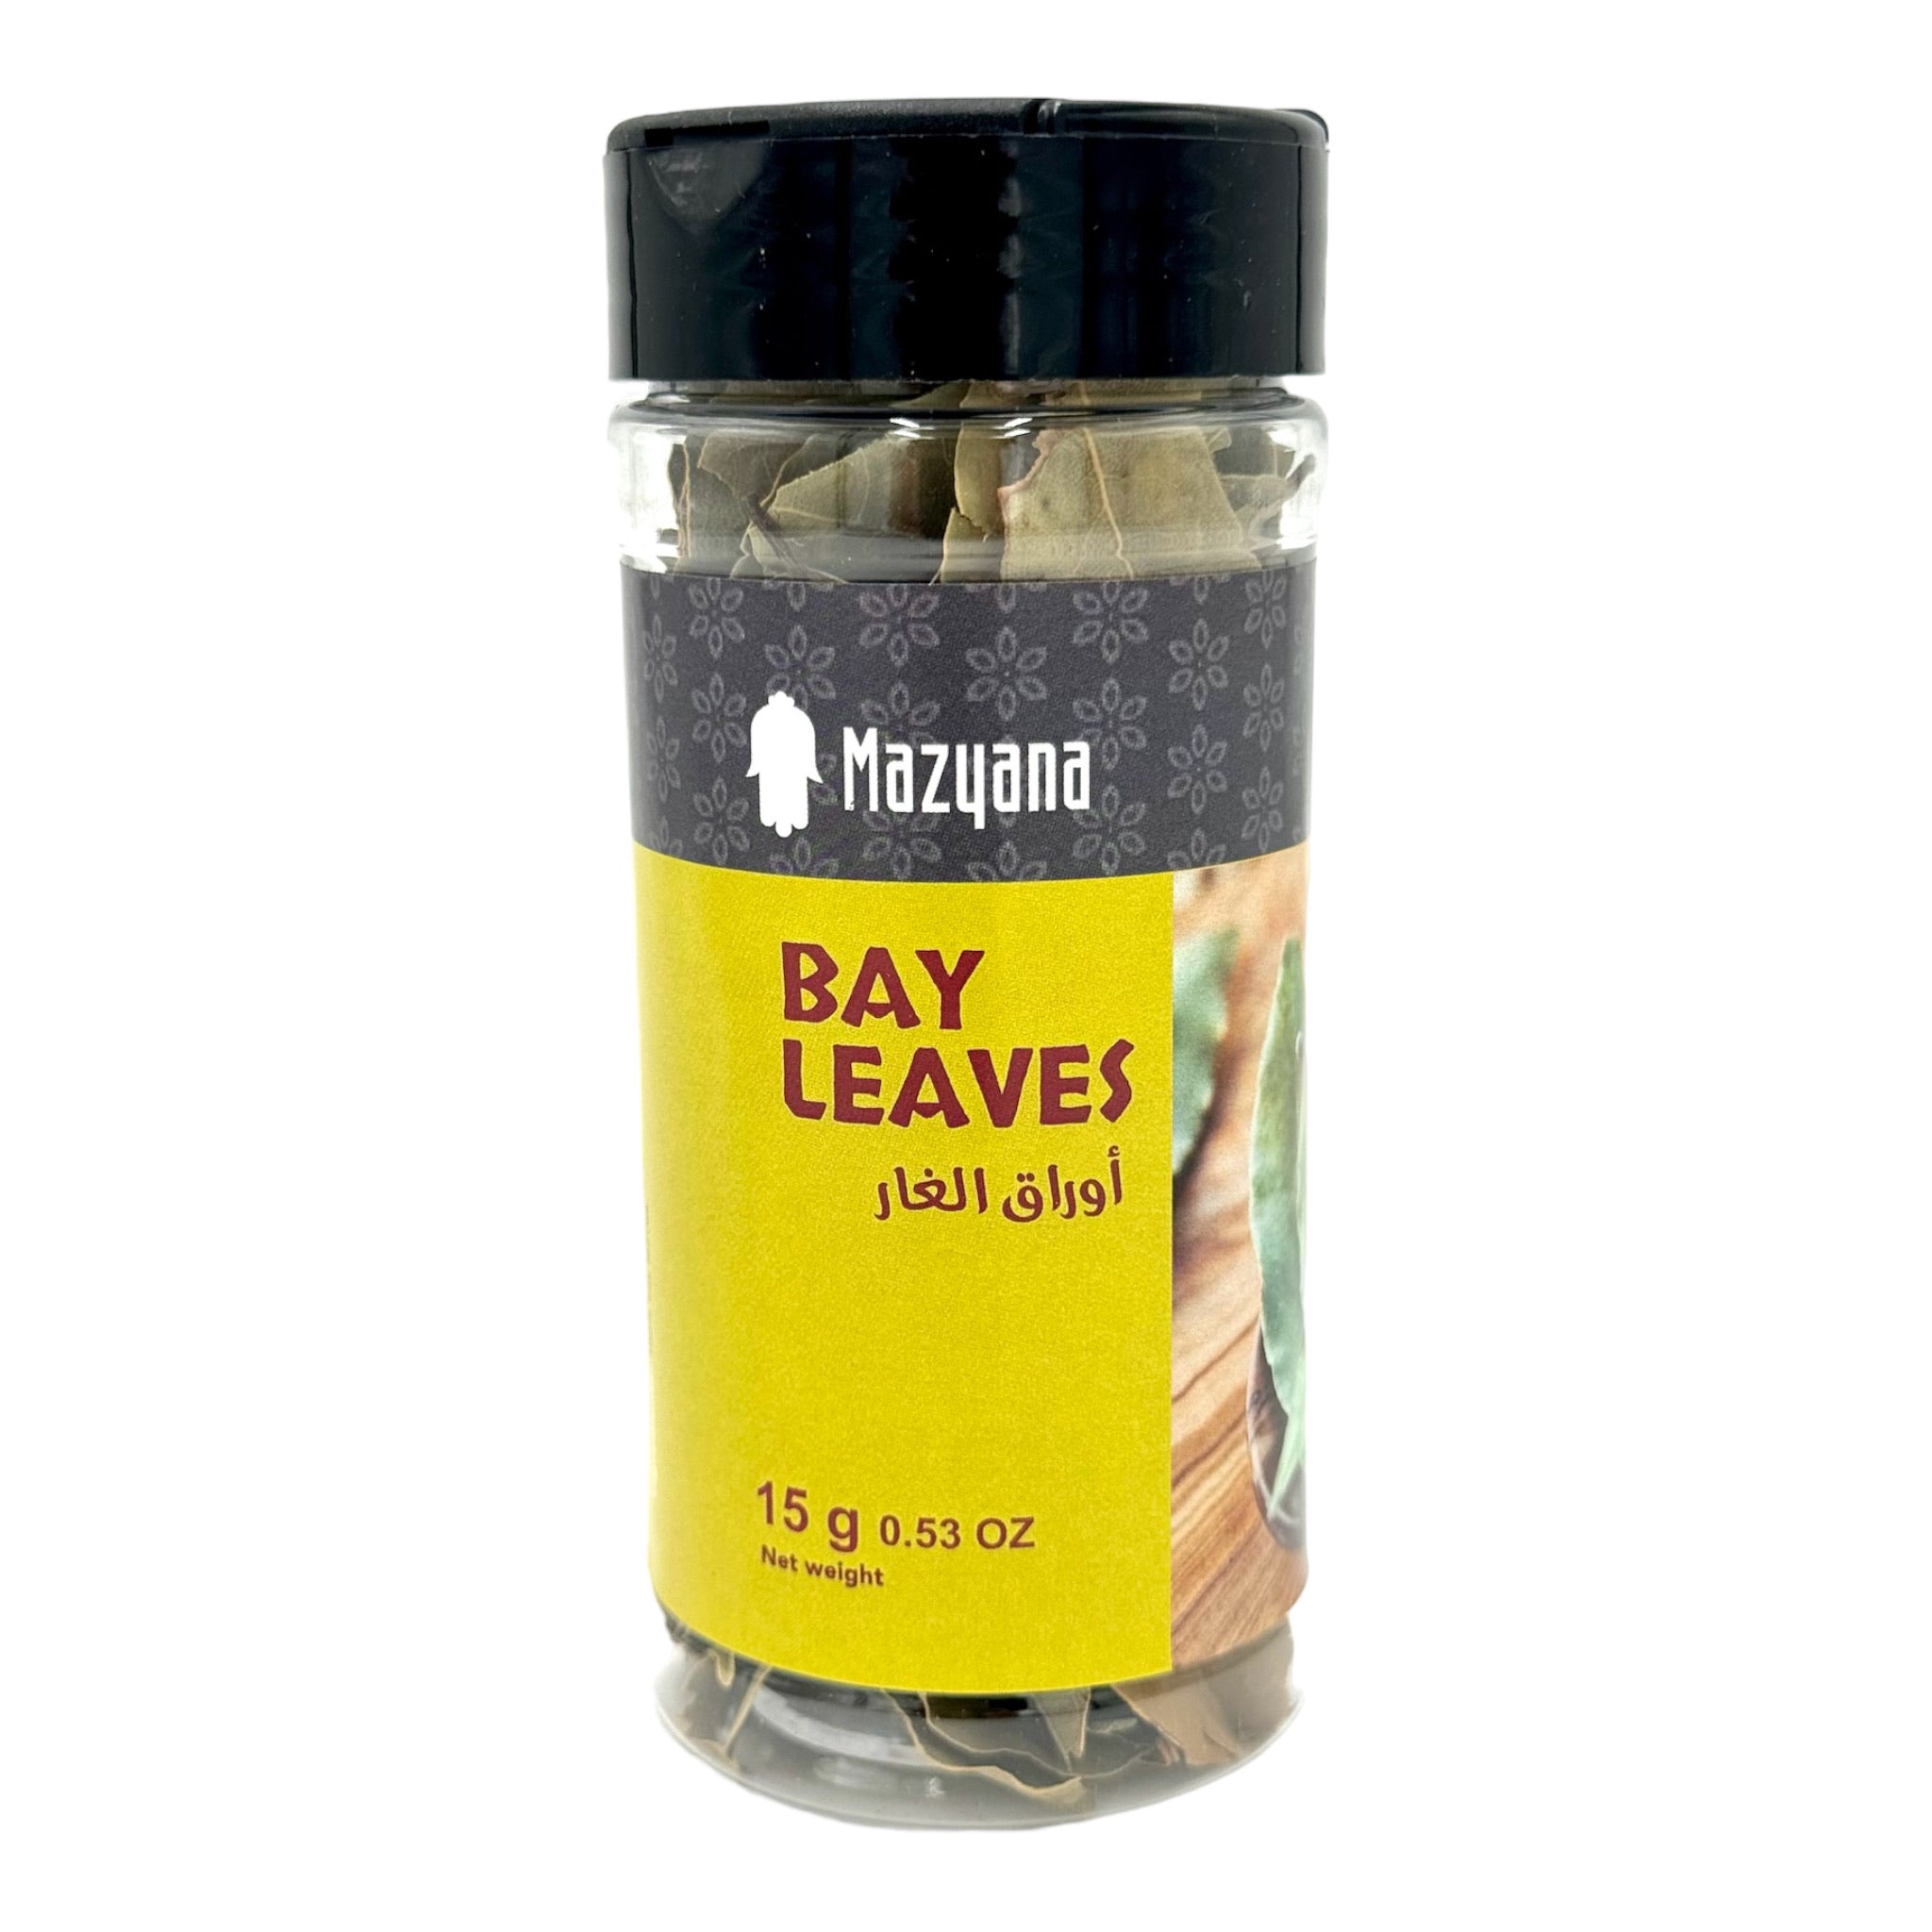 moroccan bay leaves by mazyana brand